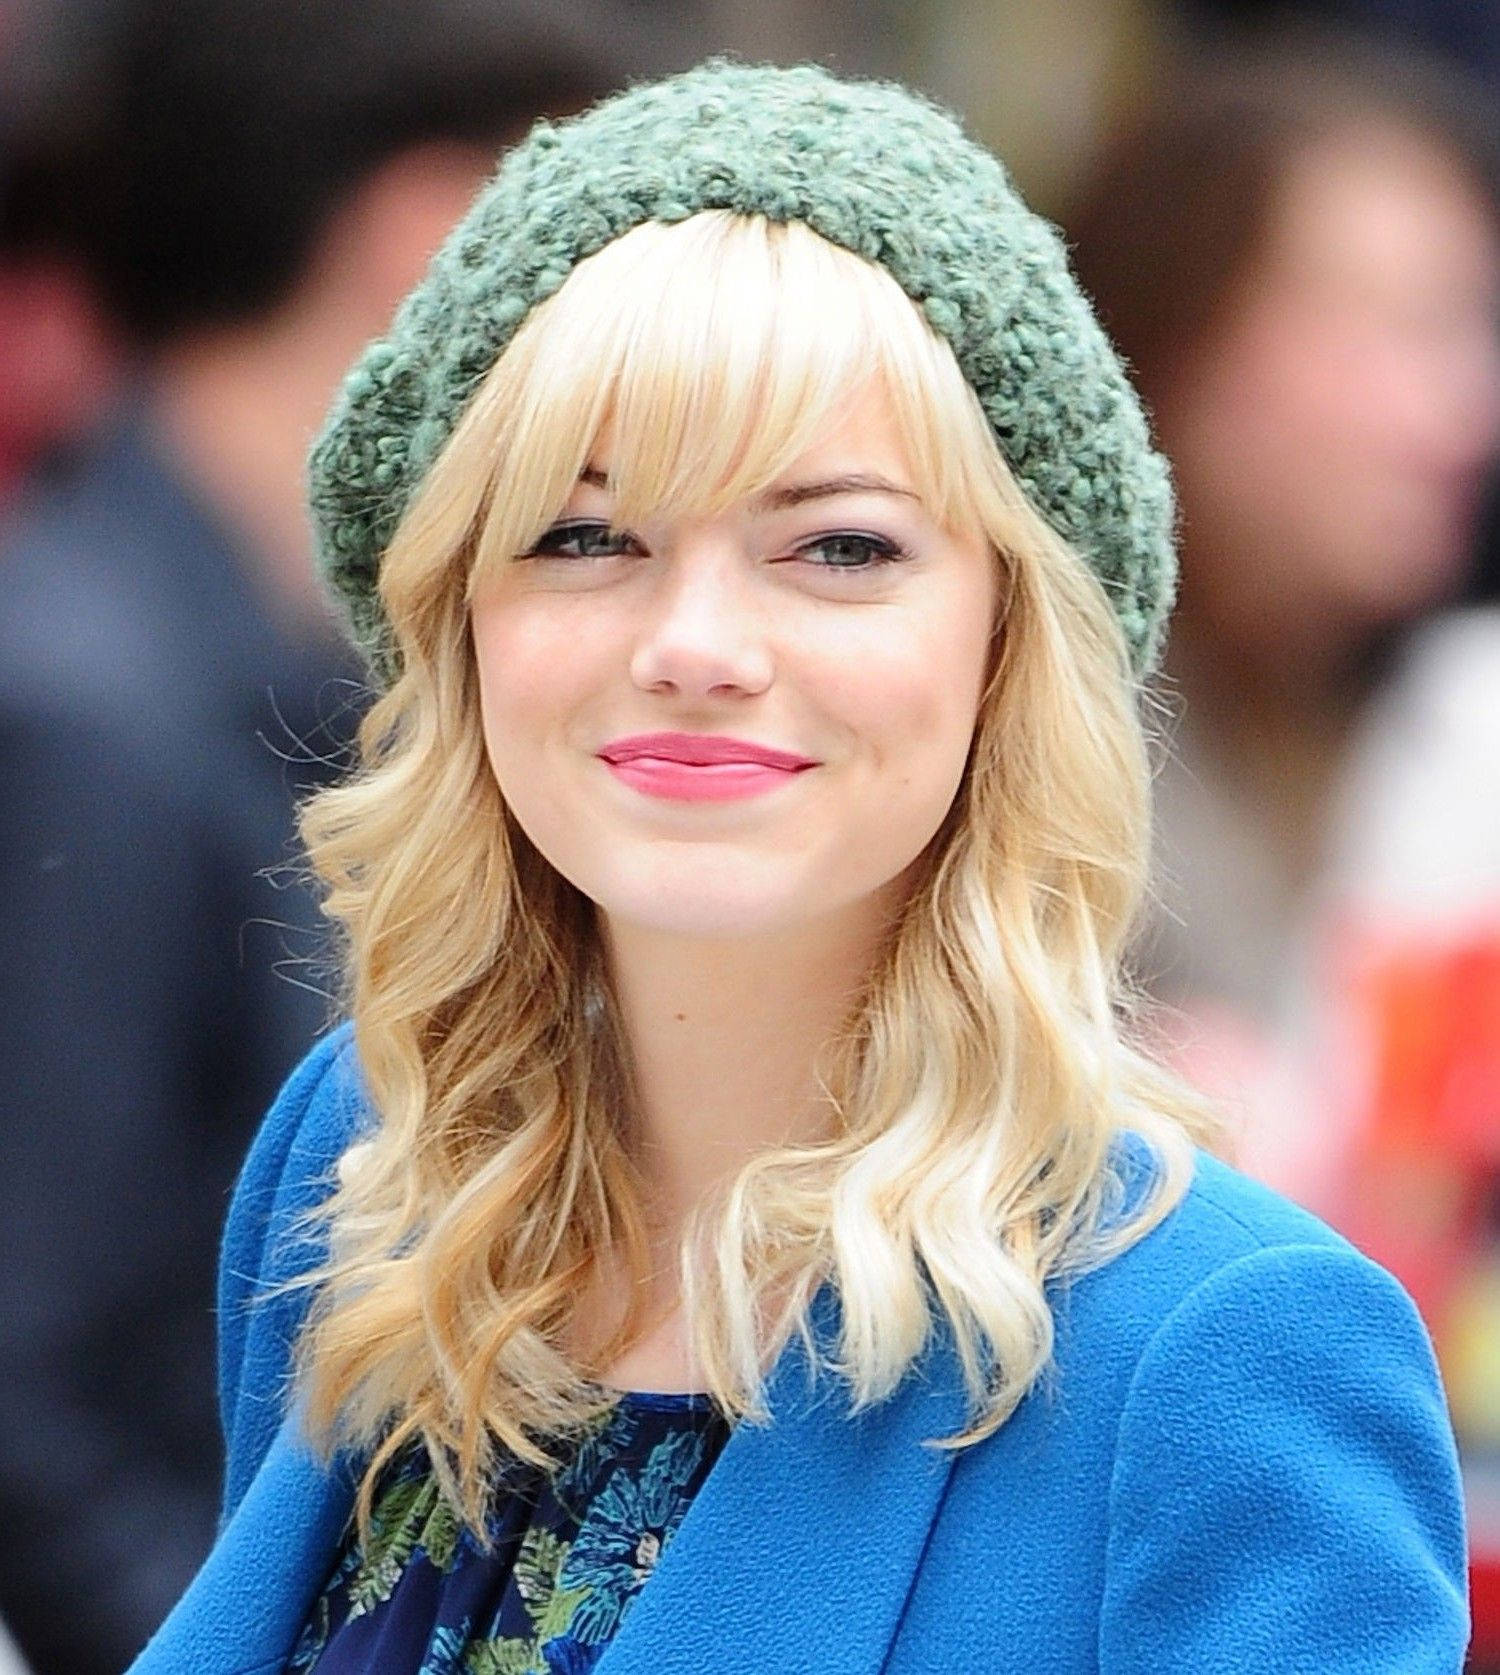 Emma Stone With Green Beret Wallpaper